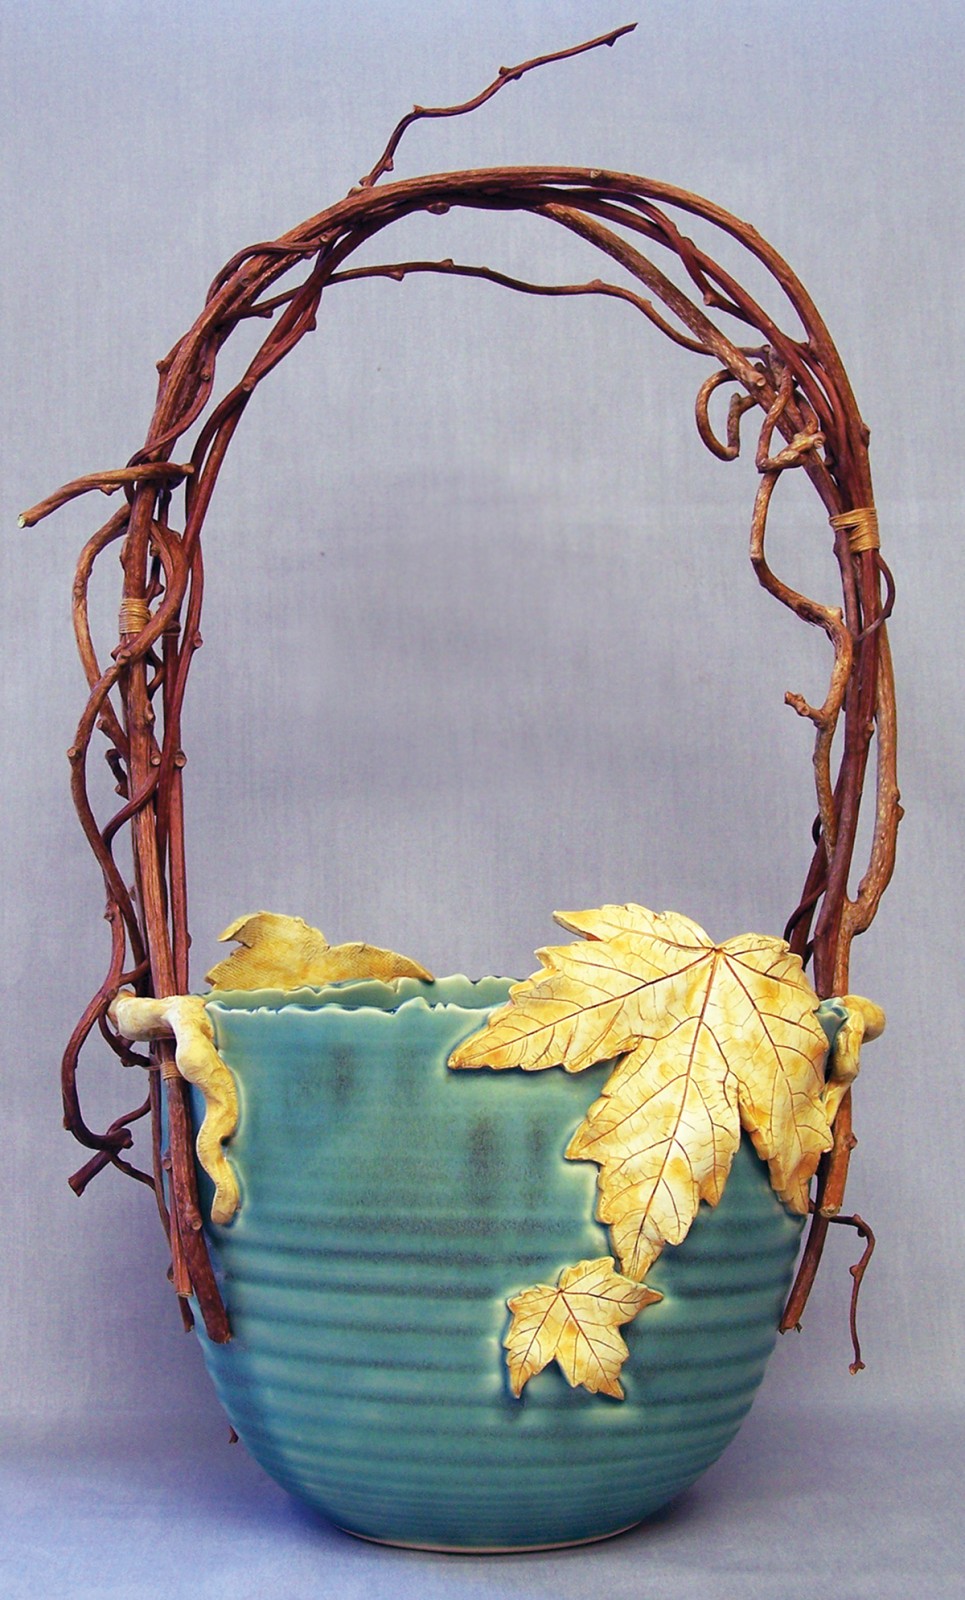 Hand thrown ceramic basket with grapevine handle and ceramic leaf details